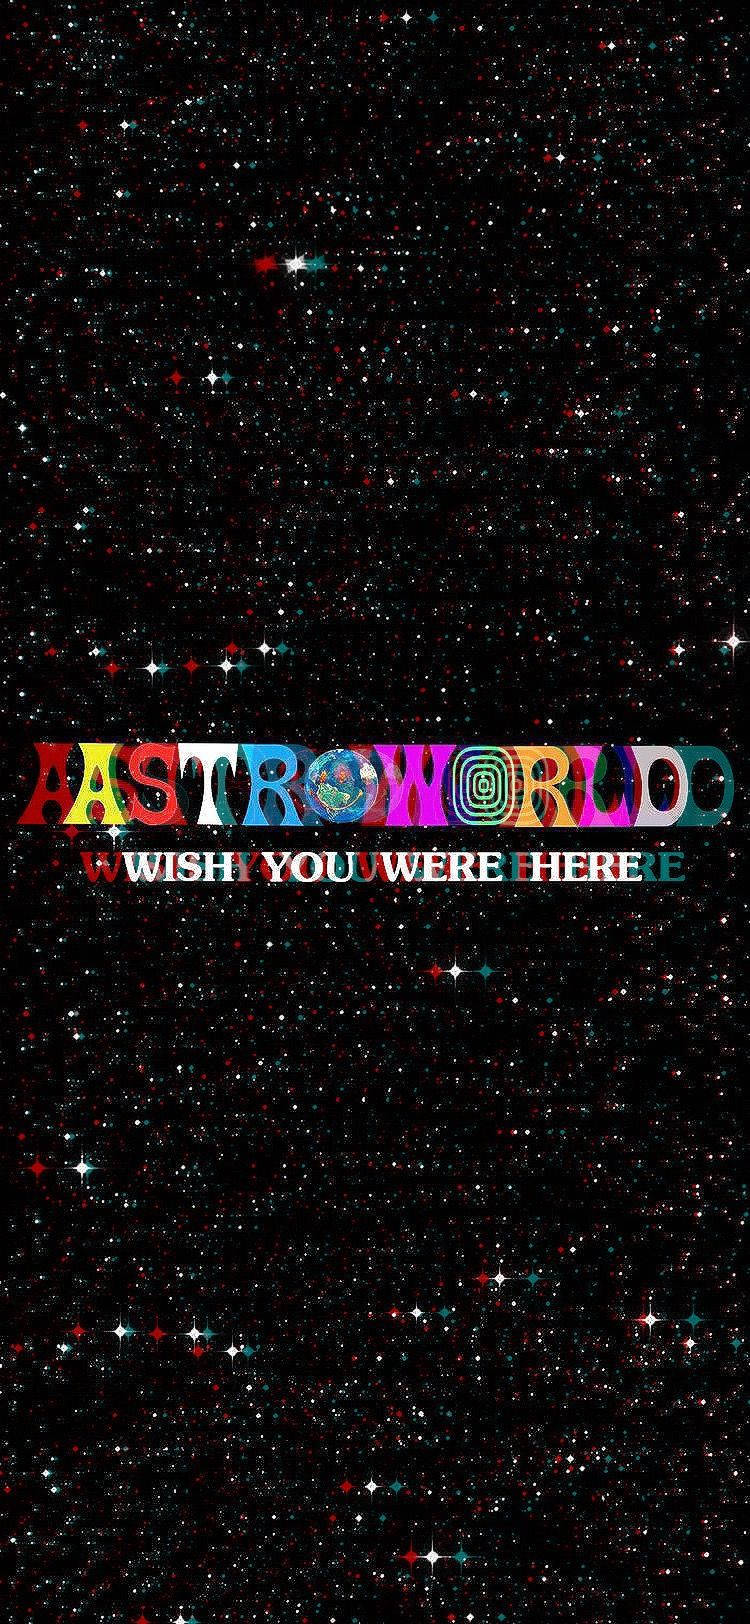 ColorCorrected Wish You Were Here iPhone Wallpaper read the captions   rpinkfloyd